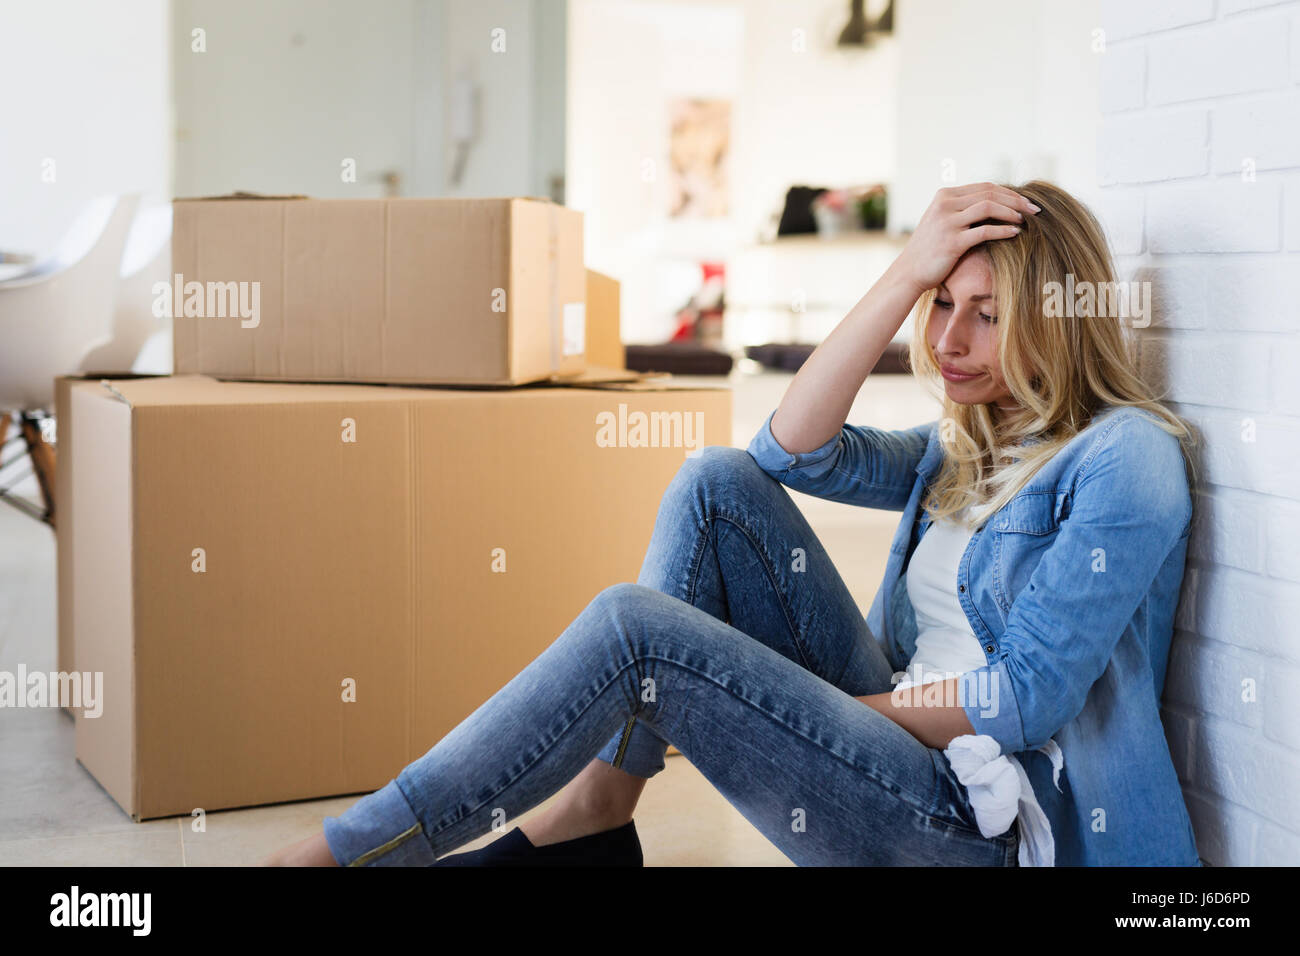 Tired woman exhausted while moving into new home Stock Photo